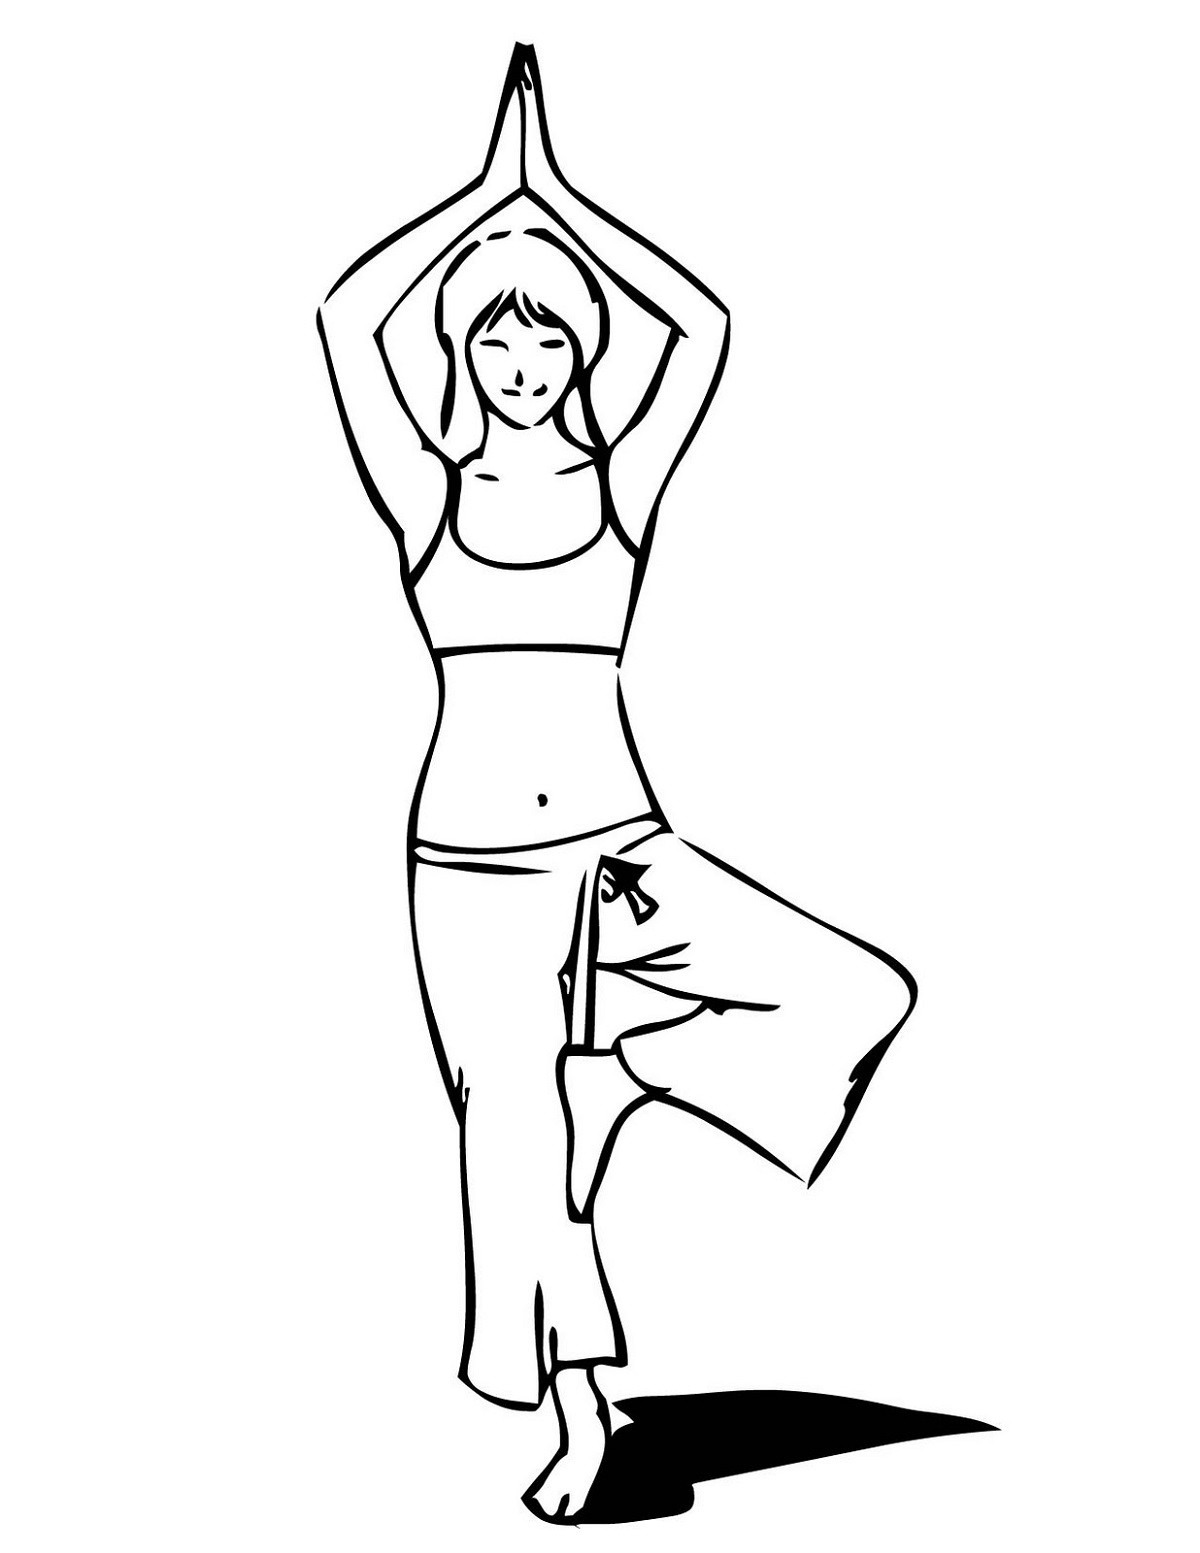 Yoga Coloring Pages
 Yoga Coloring Pages for Kids Free